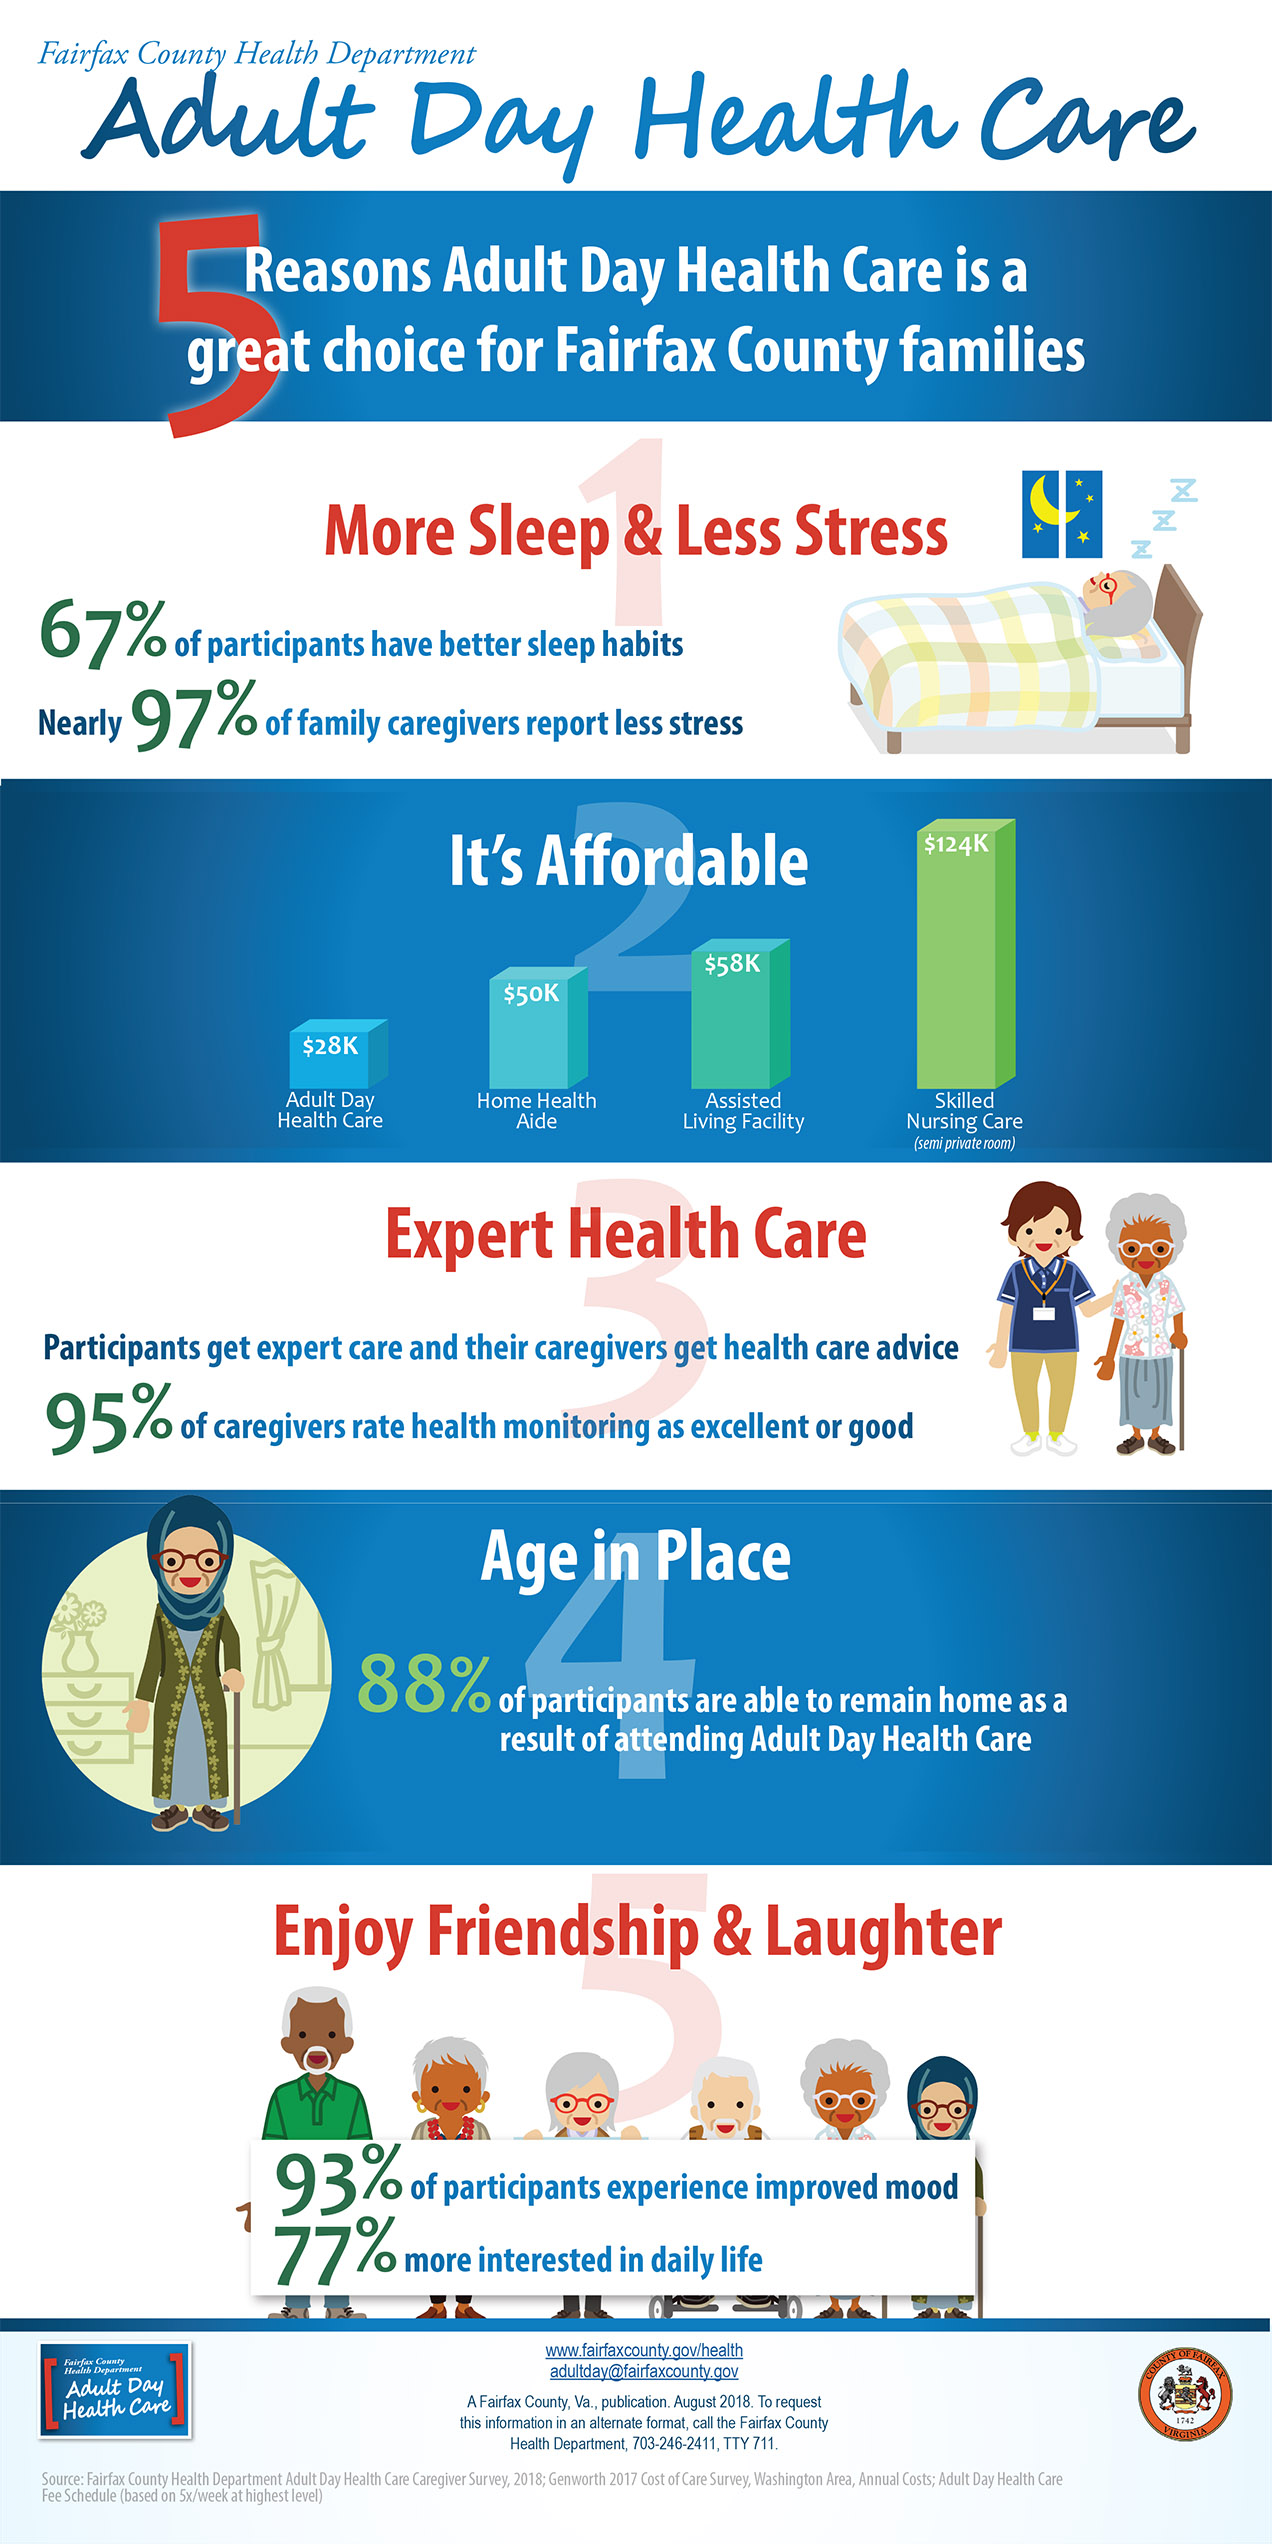 5 Reasons Why Adult Day Health Care Is a Great Choice for Fairfax families